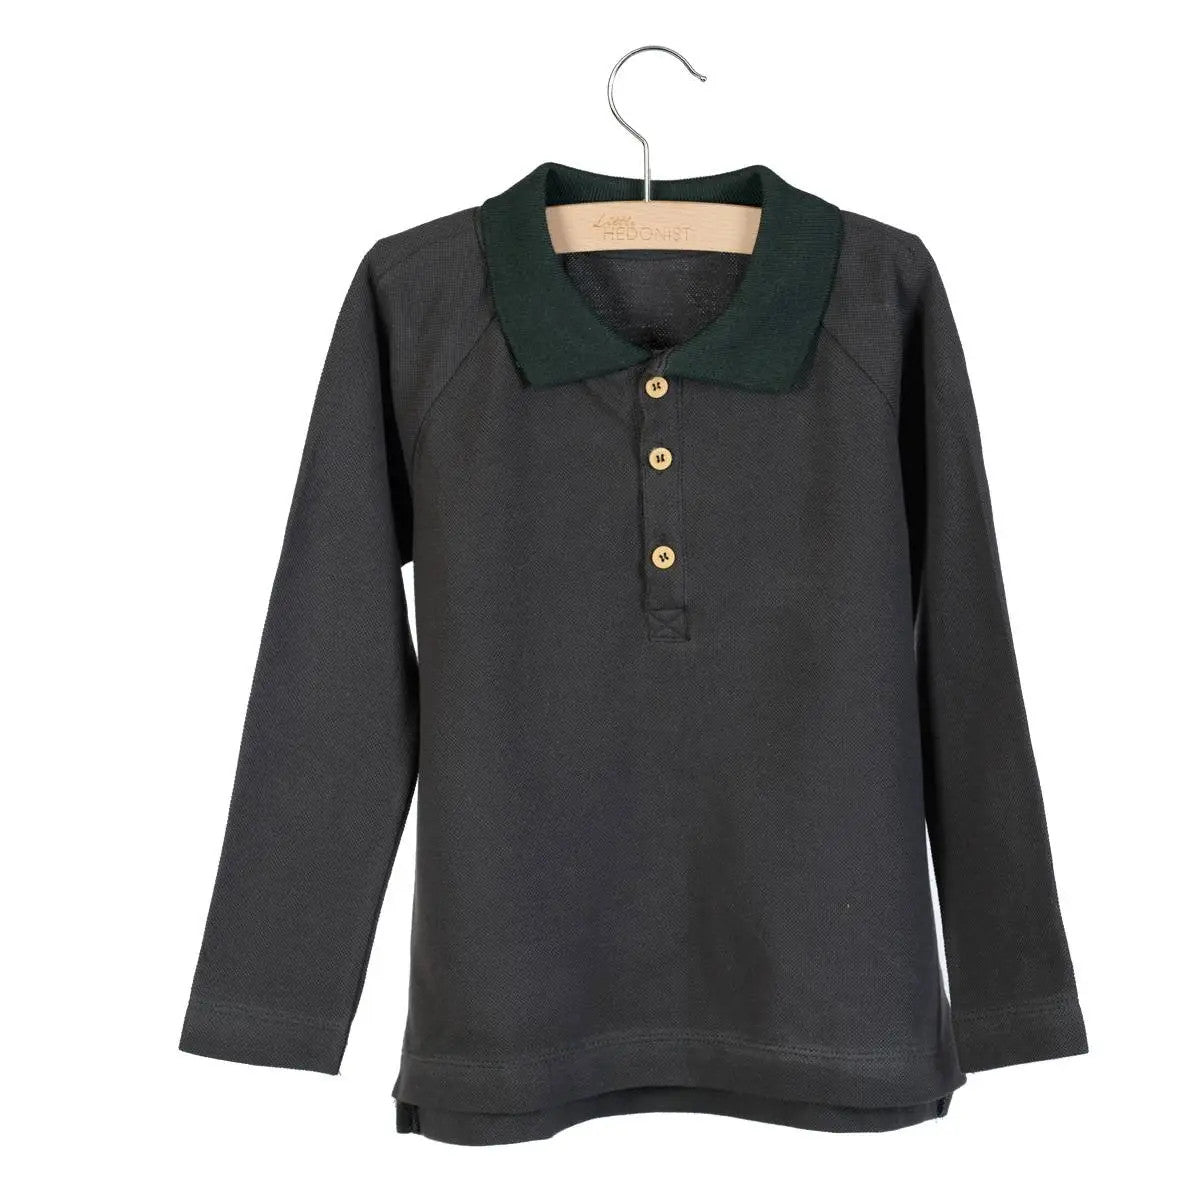 Little Hedonist organic dark grey longsleeve polo shirt with collar and buttons on the front.